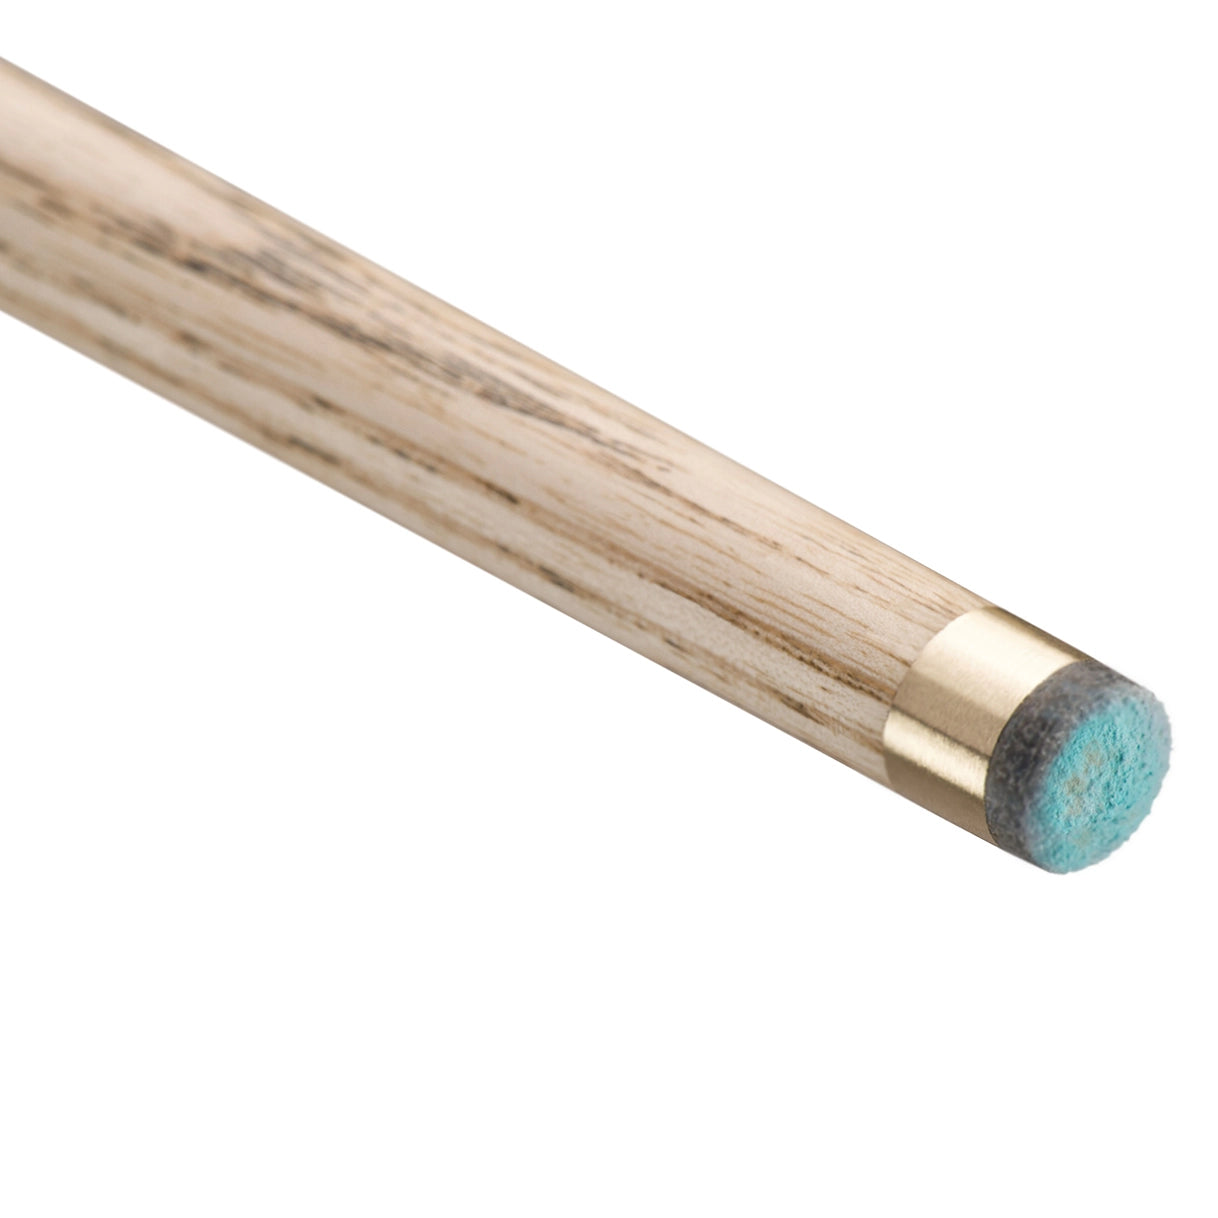 Peradon Chiltern 3/4 Jointed Snooker Cue. Tip view